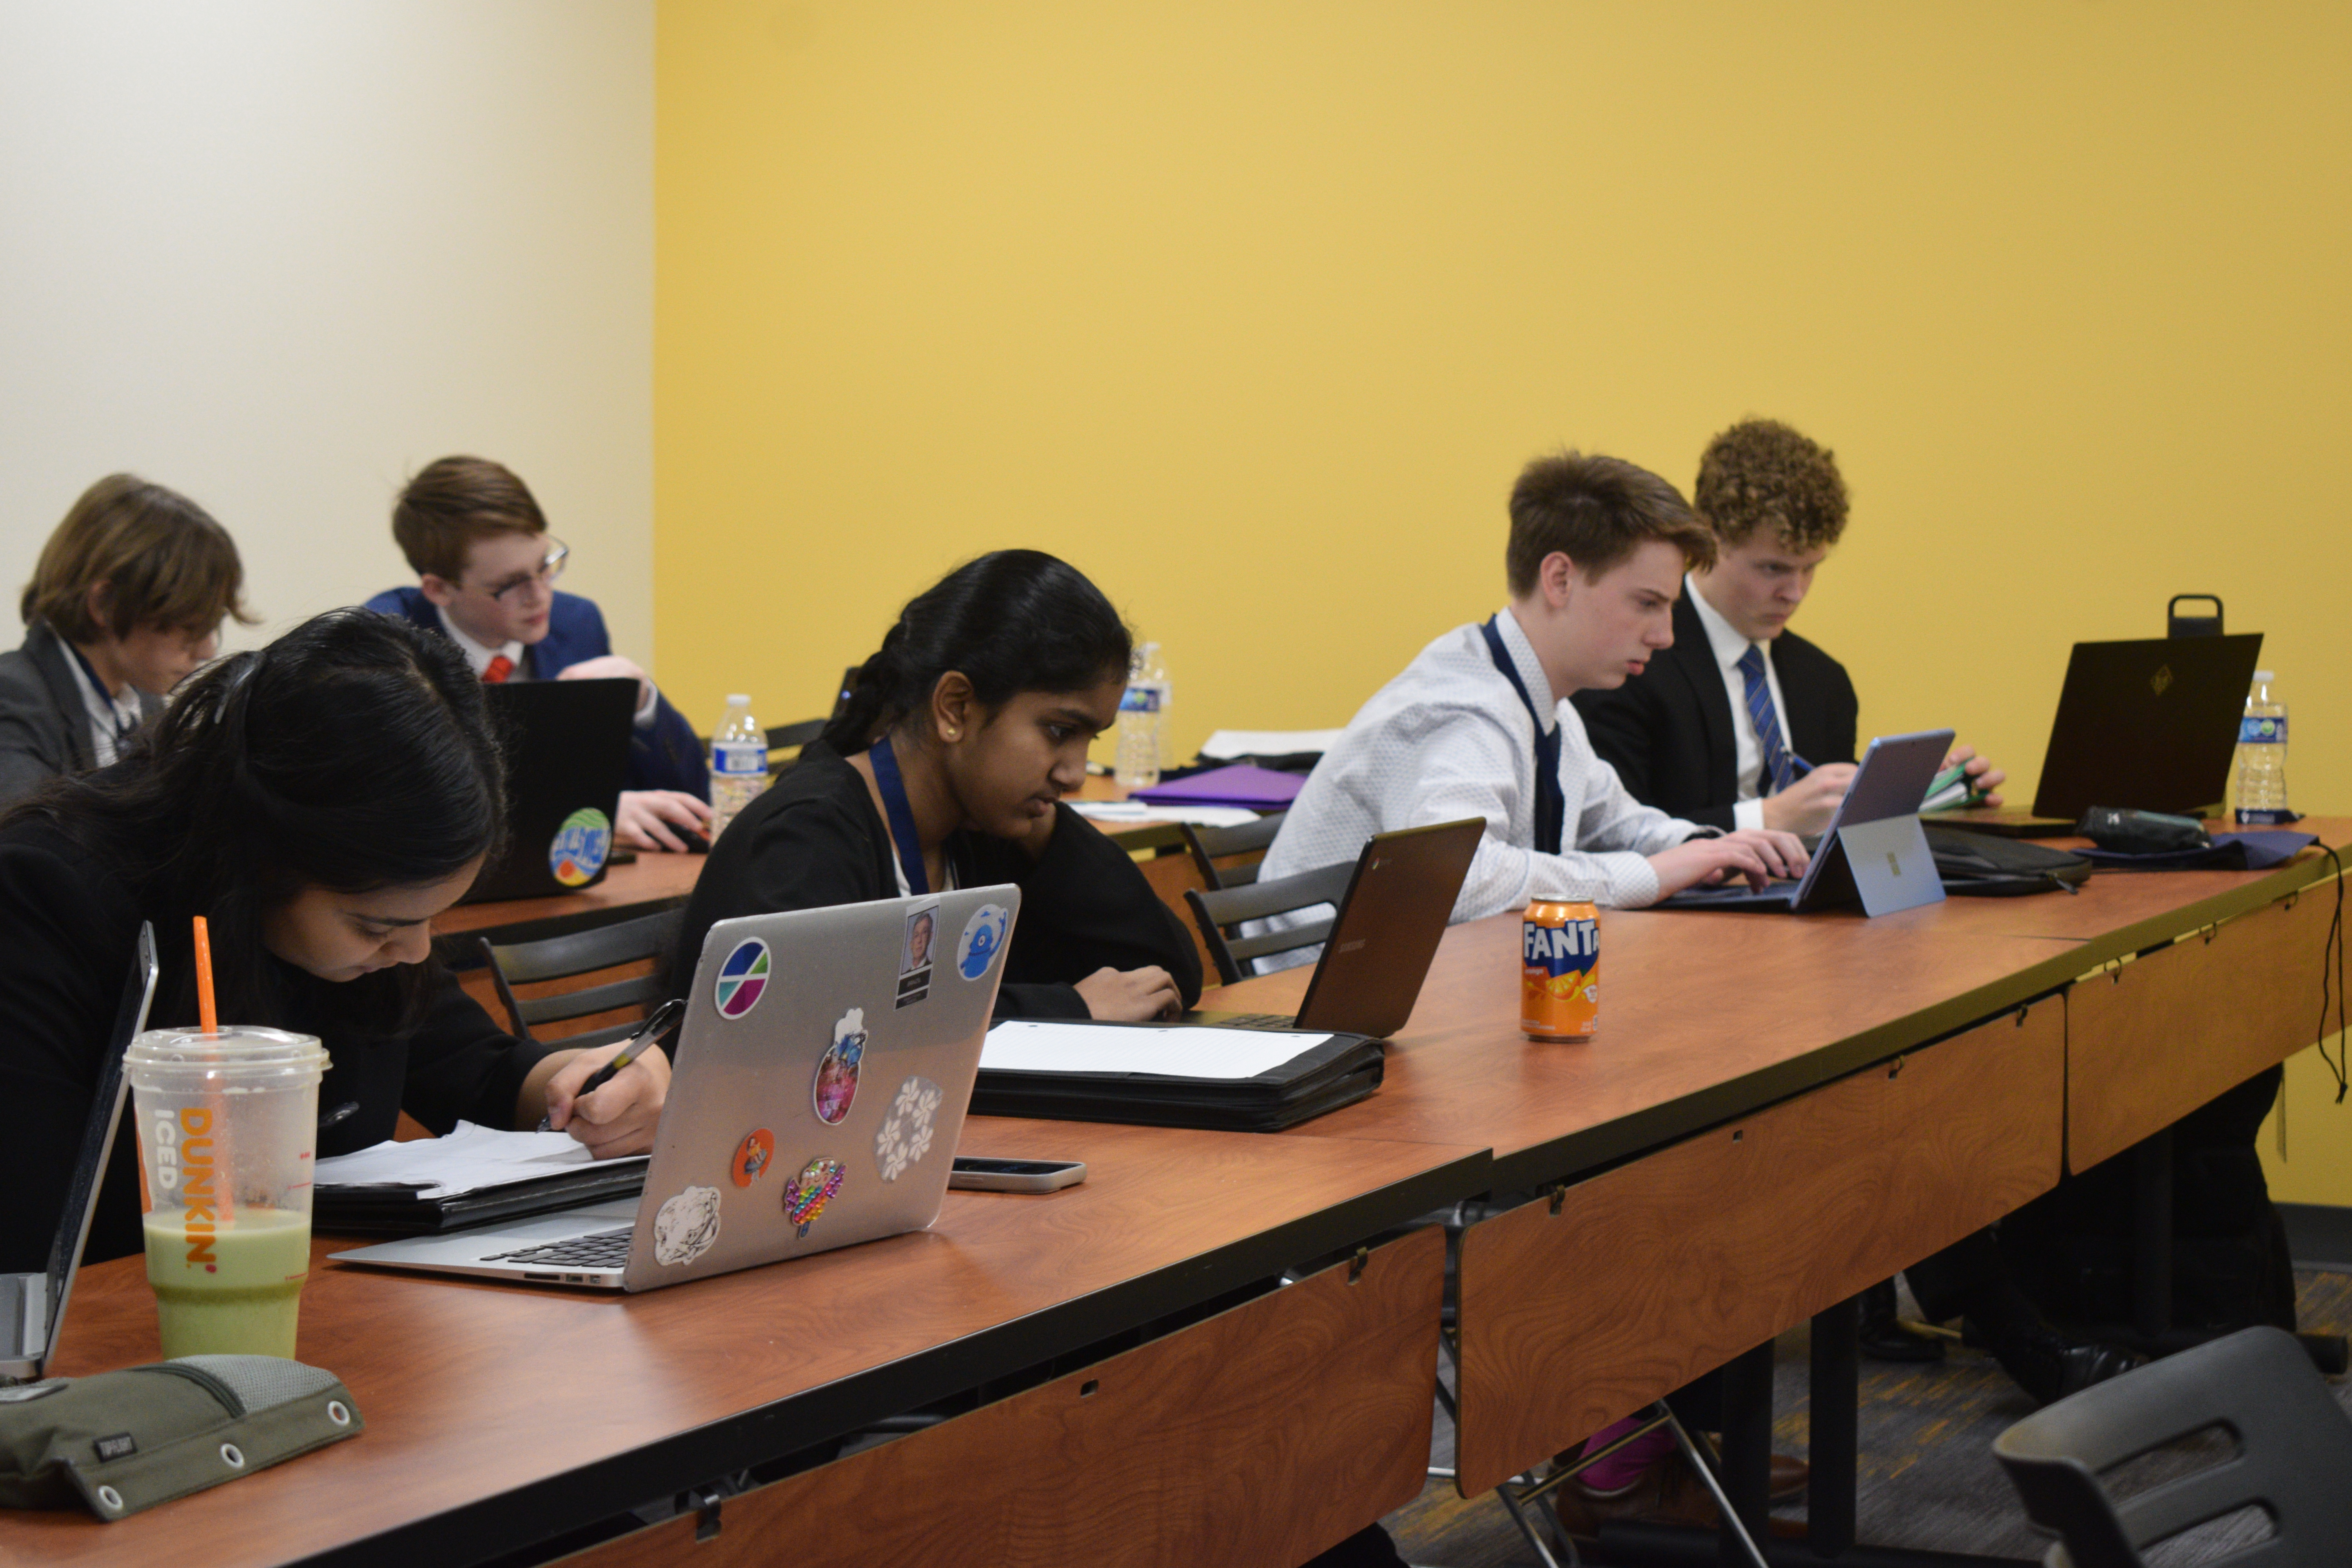 A diverse group of high school students prep in a VU classroom.